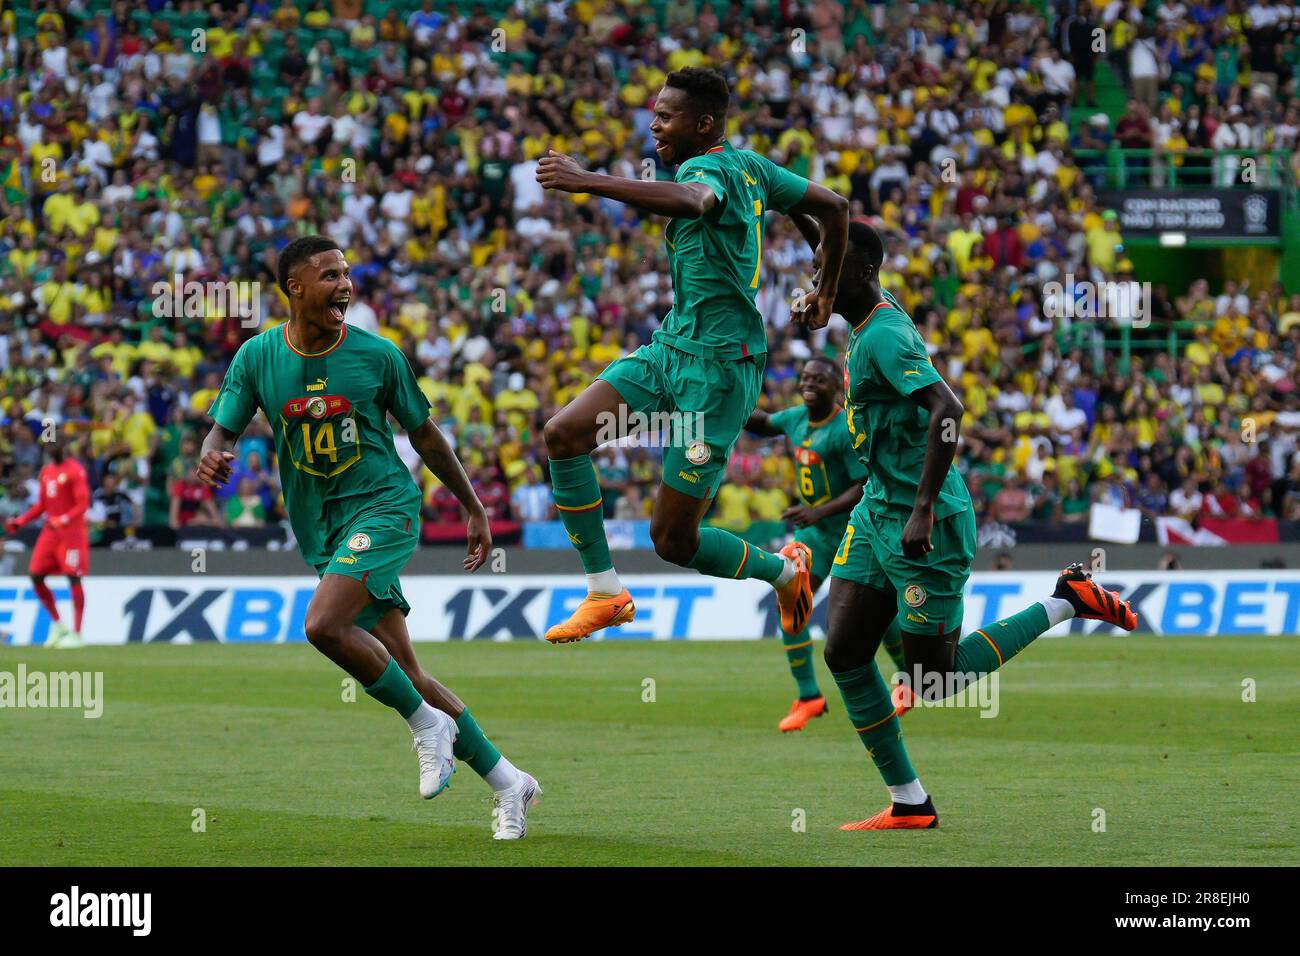 Ismail Joshua Jackobs from Senegal (L), Mouhamadou Habibou Diallo from Senegal (C) and Pape Alassane Gueye from Senegal (R) celebrate a goal during friendly football match between Brazil and Senegal at Estadio Jose Alvalade. Final Score: Brazil 2:4 Senegal (Photo by Bruno de Carvalho / SOPA Images/Sipa USA) Stock Photo